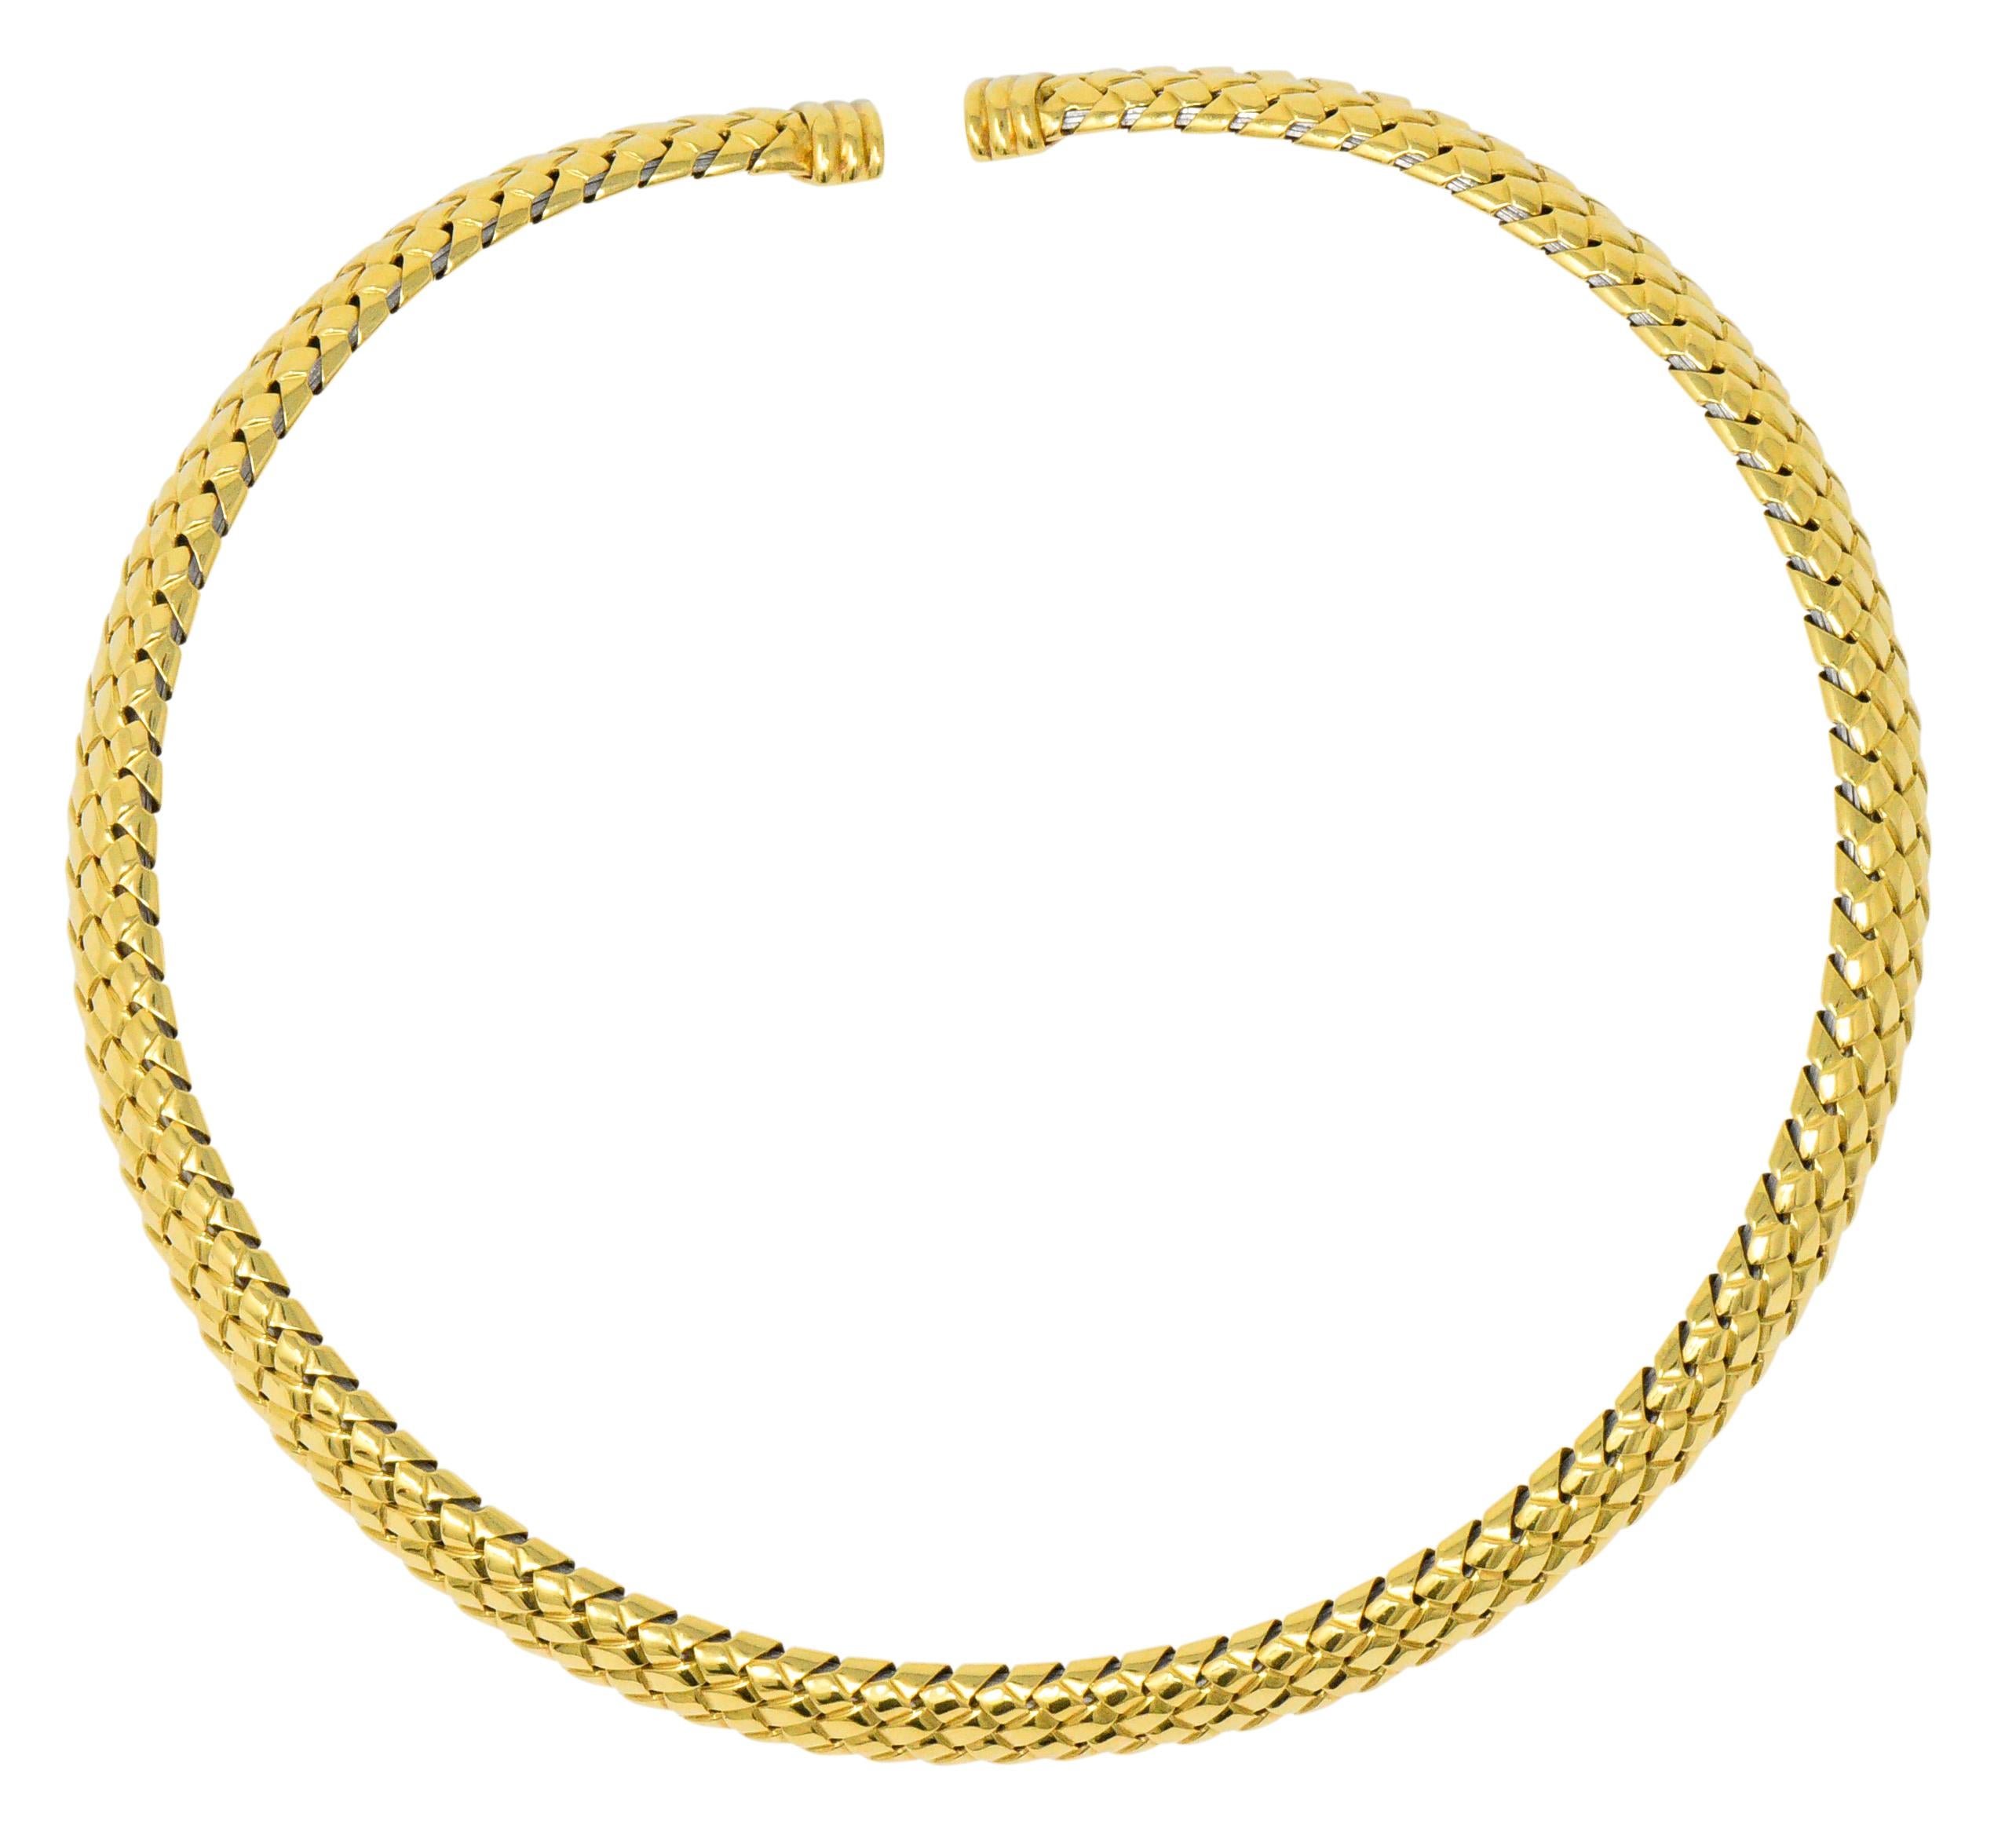 Woven highly polished gold with fluted gold terminals 

Inner flexible metal core

Fully singed Tiffany & Co. and dated 1997

Inner Circumference: 13 1/2 Inches 

Width: 10.0 mm

Total Weight: 85.8 Grams

Chic. Stylish. Refined. 

We- 1733